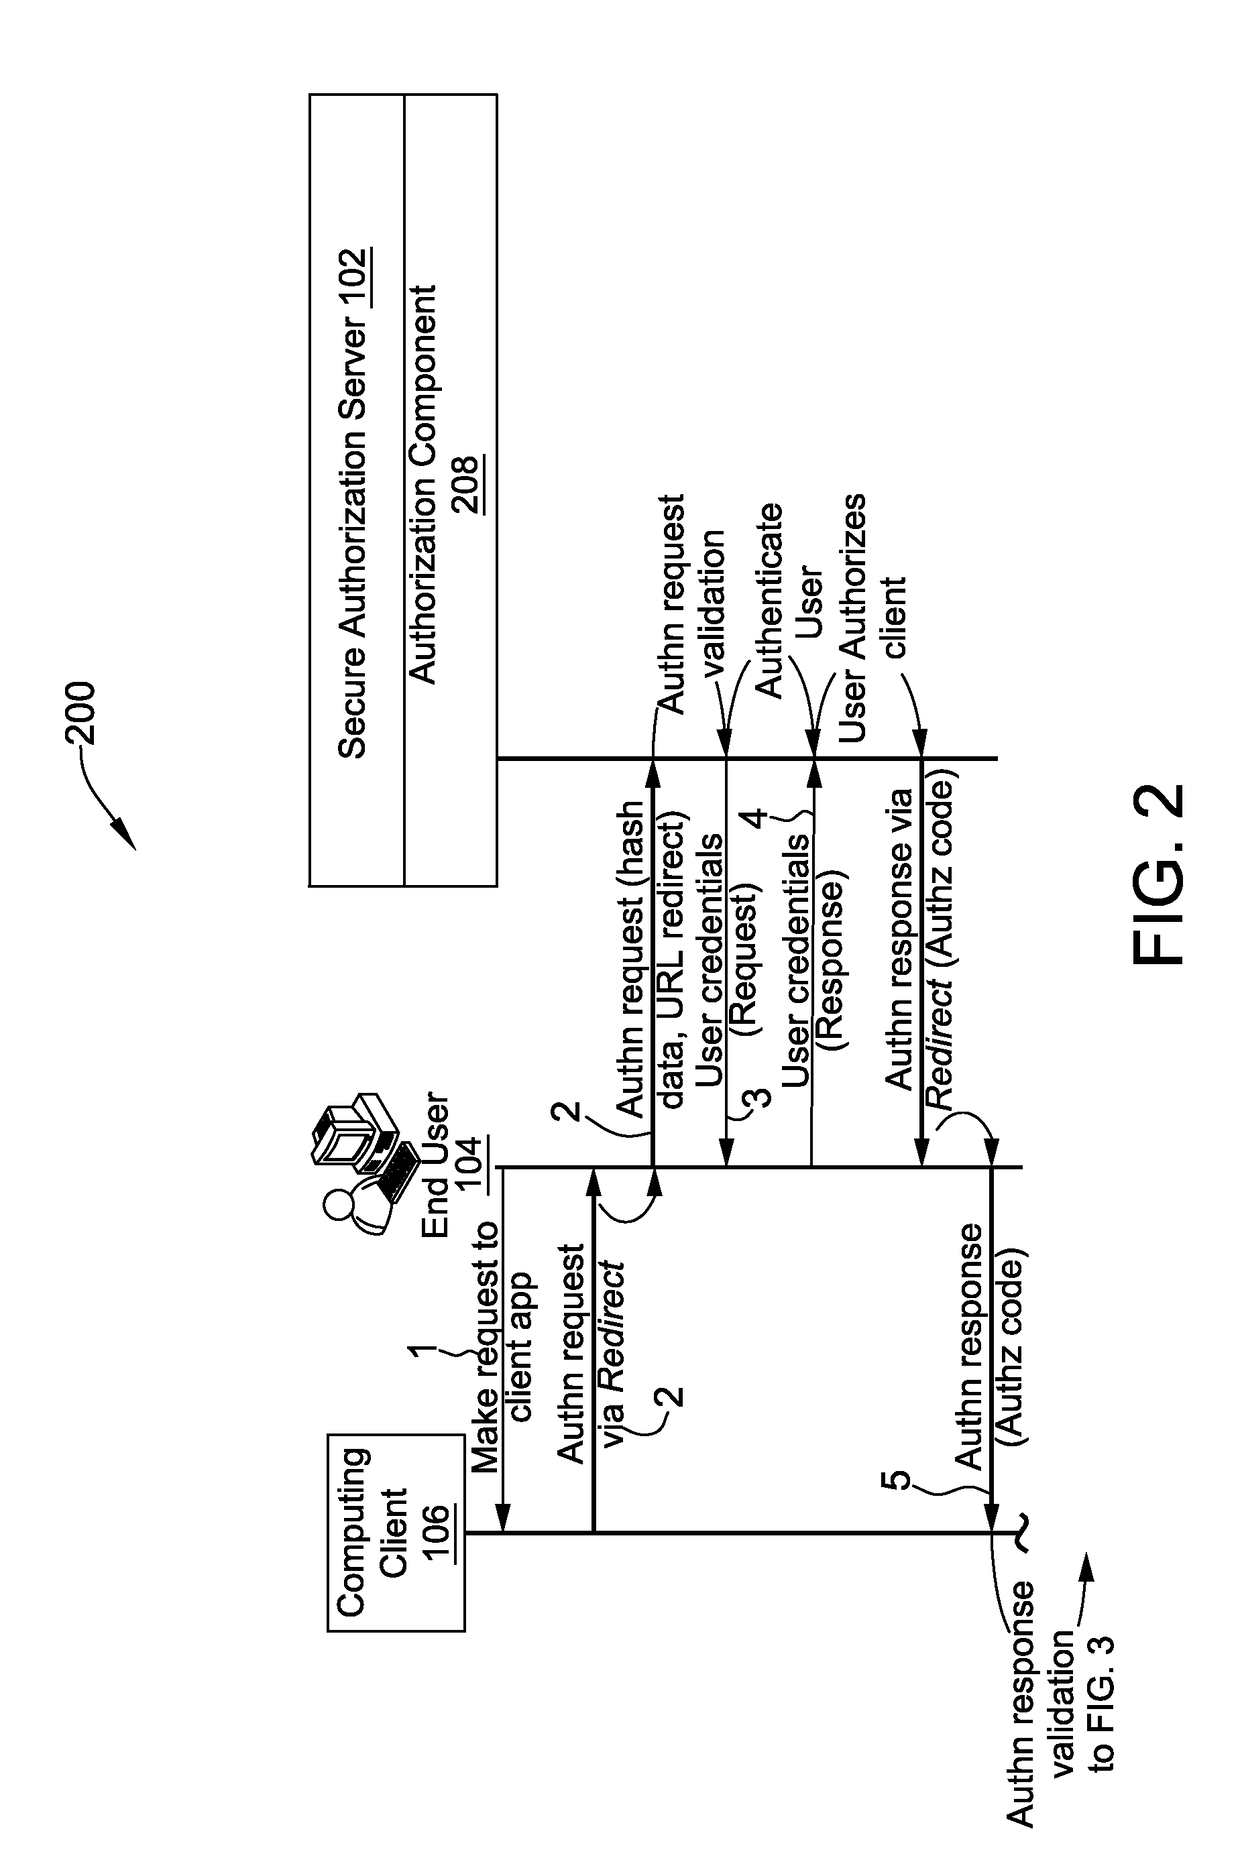 Systems and Methods for Authenticating an Online User Using a Secure Authorization Server